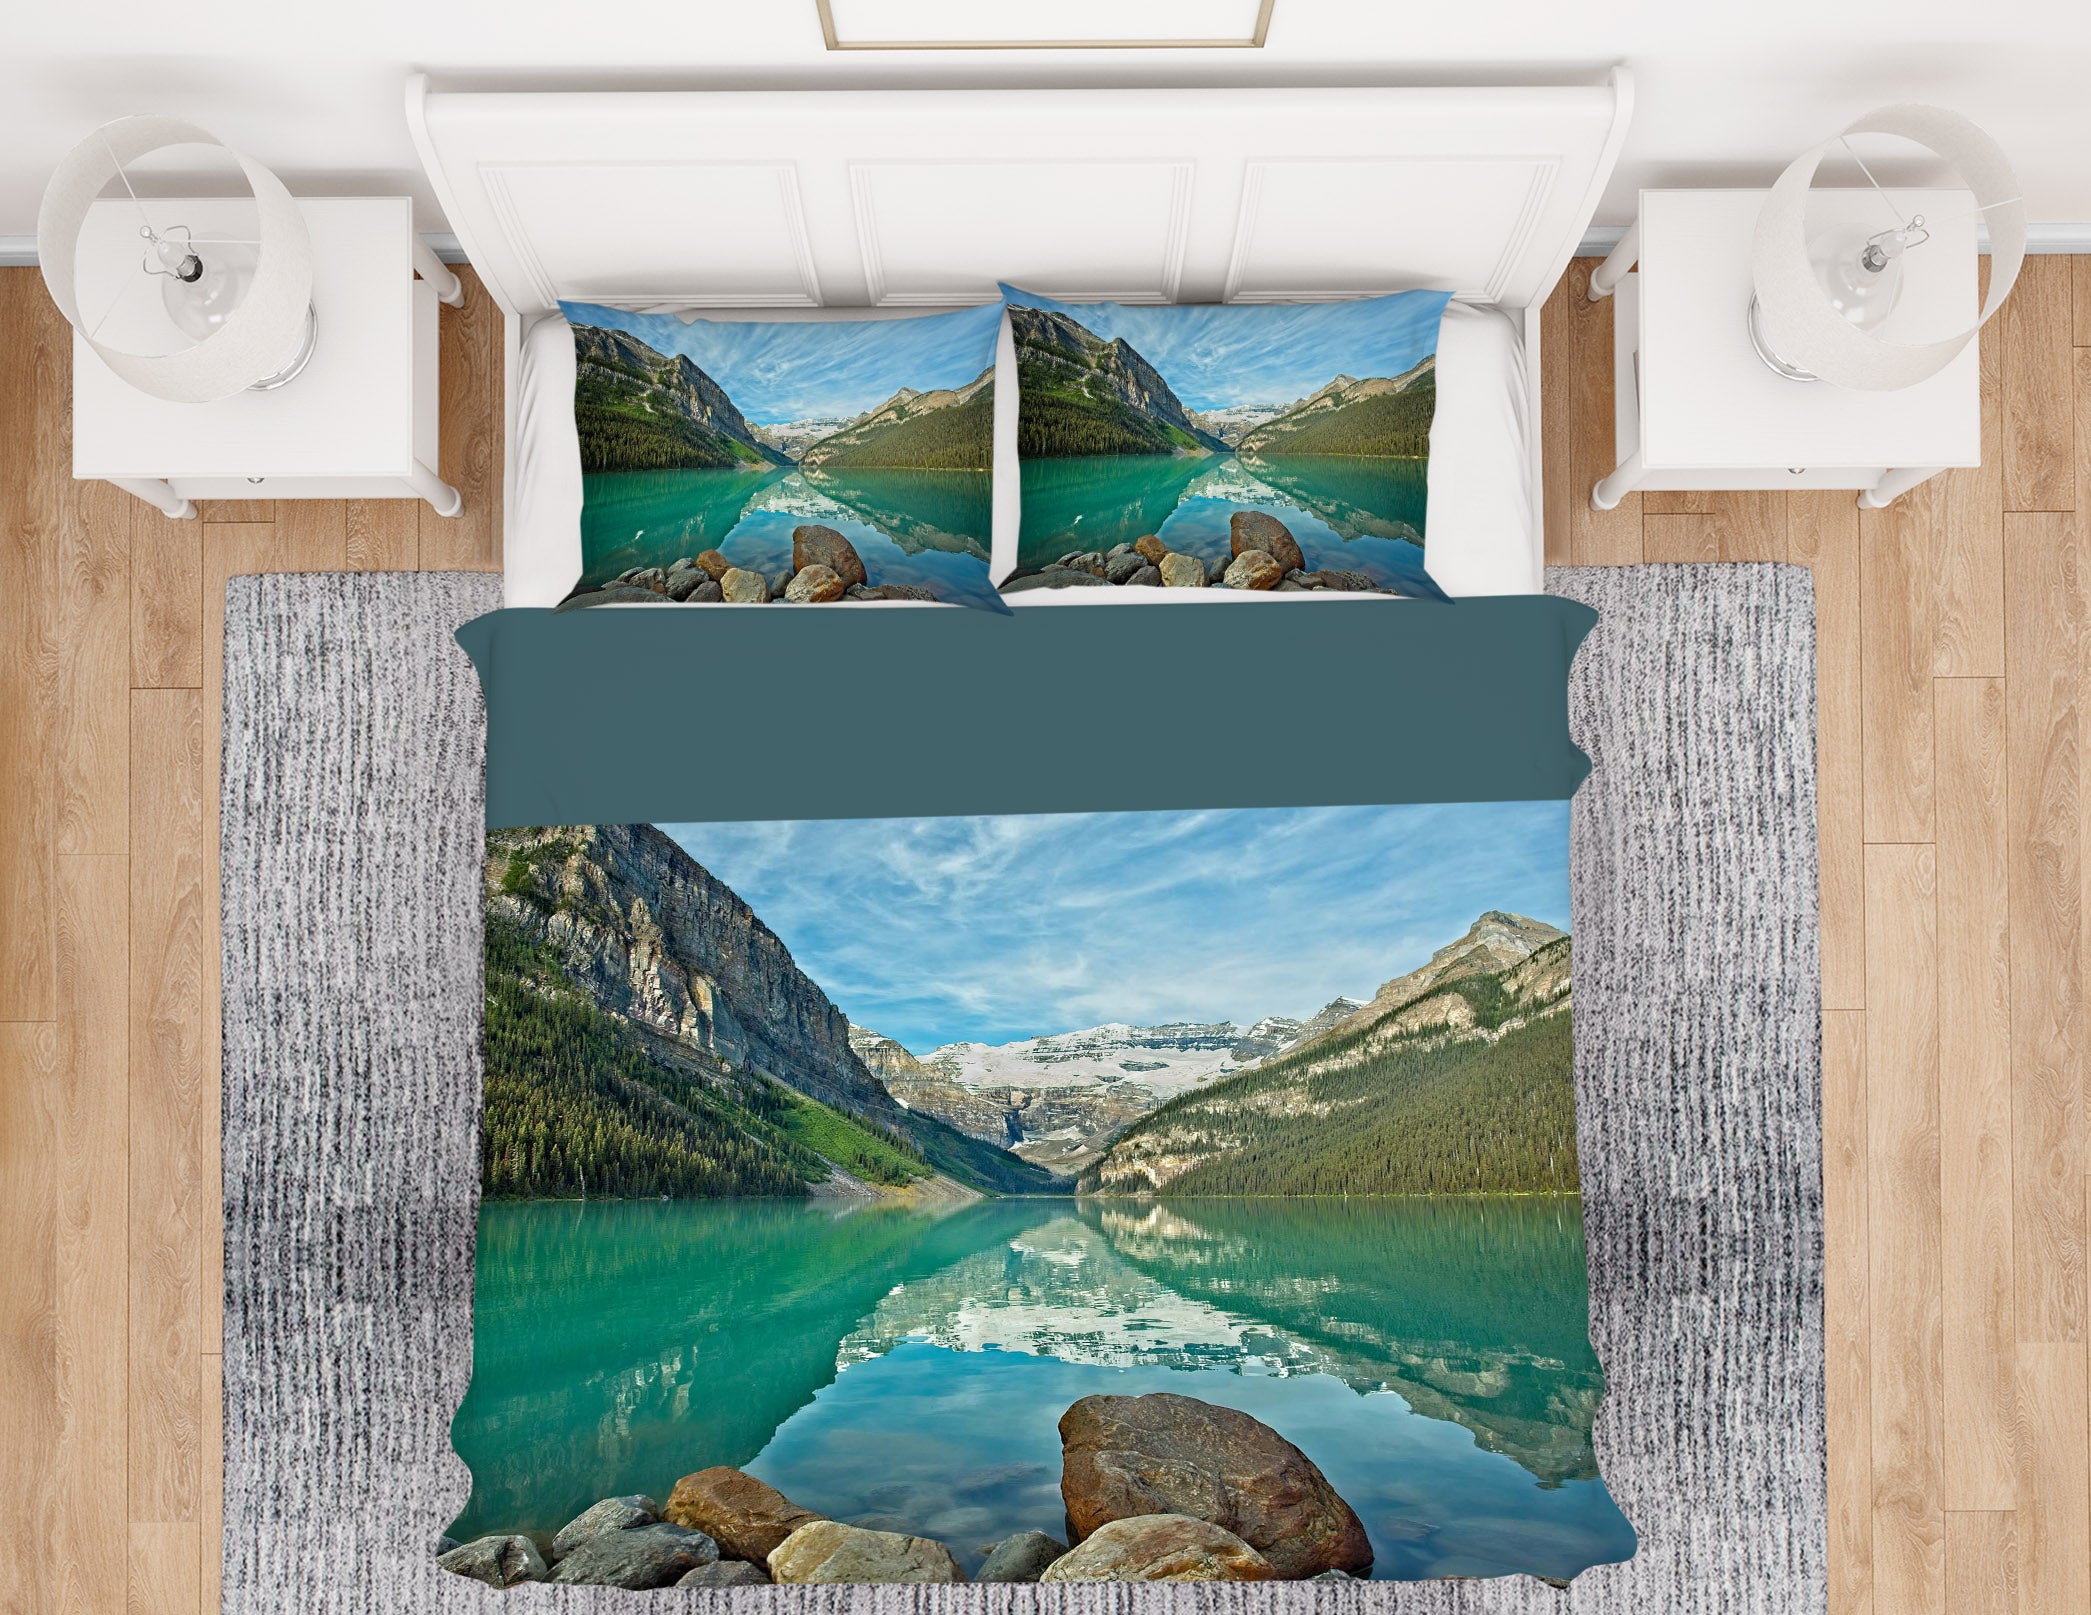 3D Lake Louise 2115 Kathy Barefield Bedding Bed Pillowcases Quilt